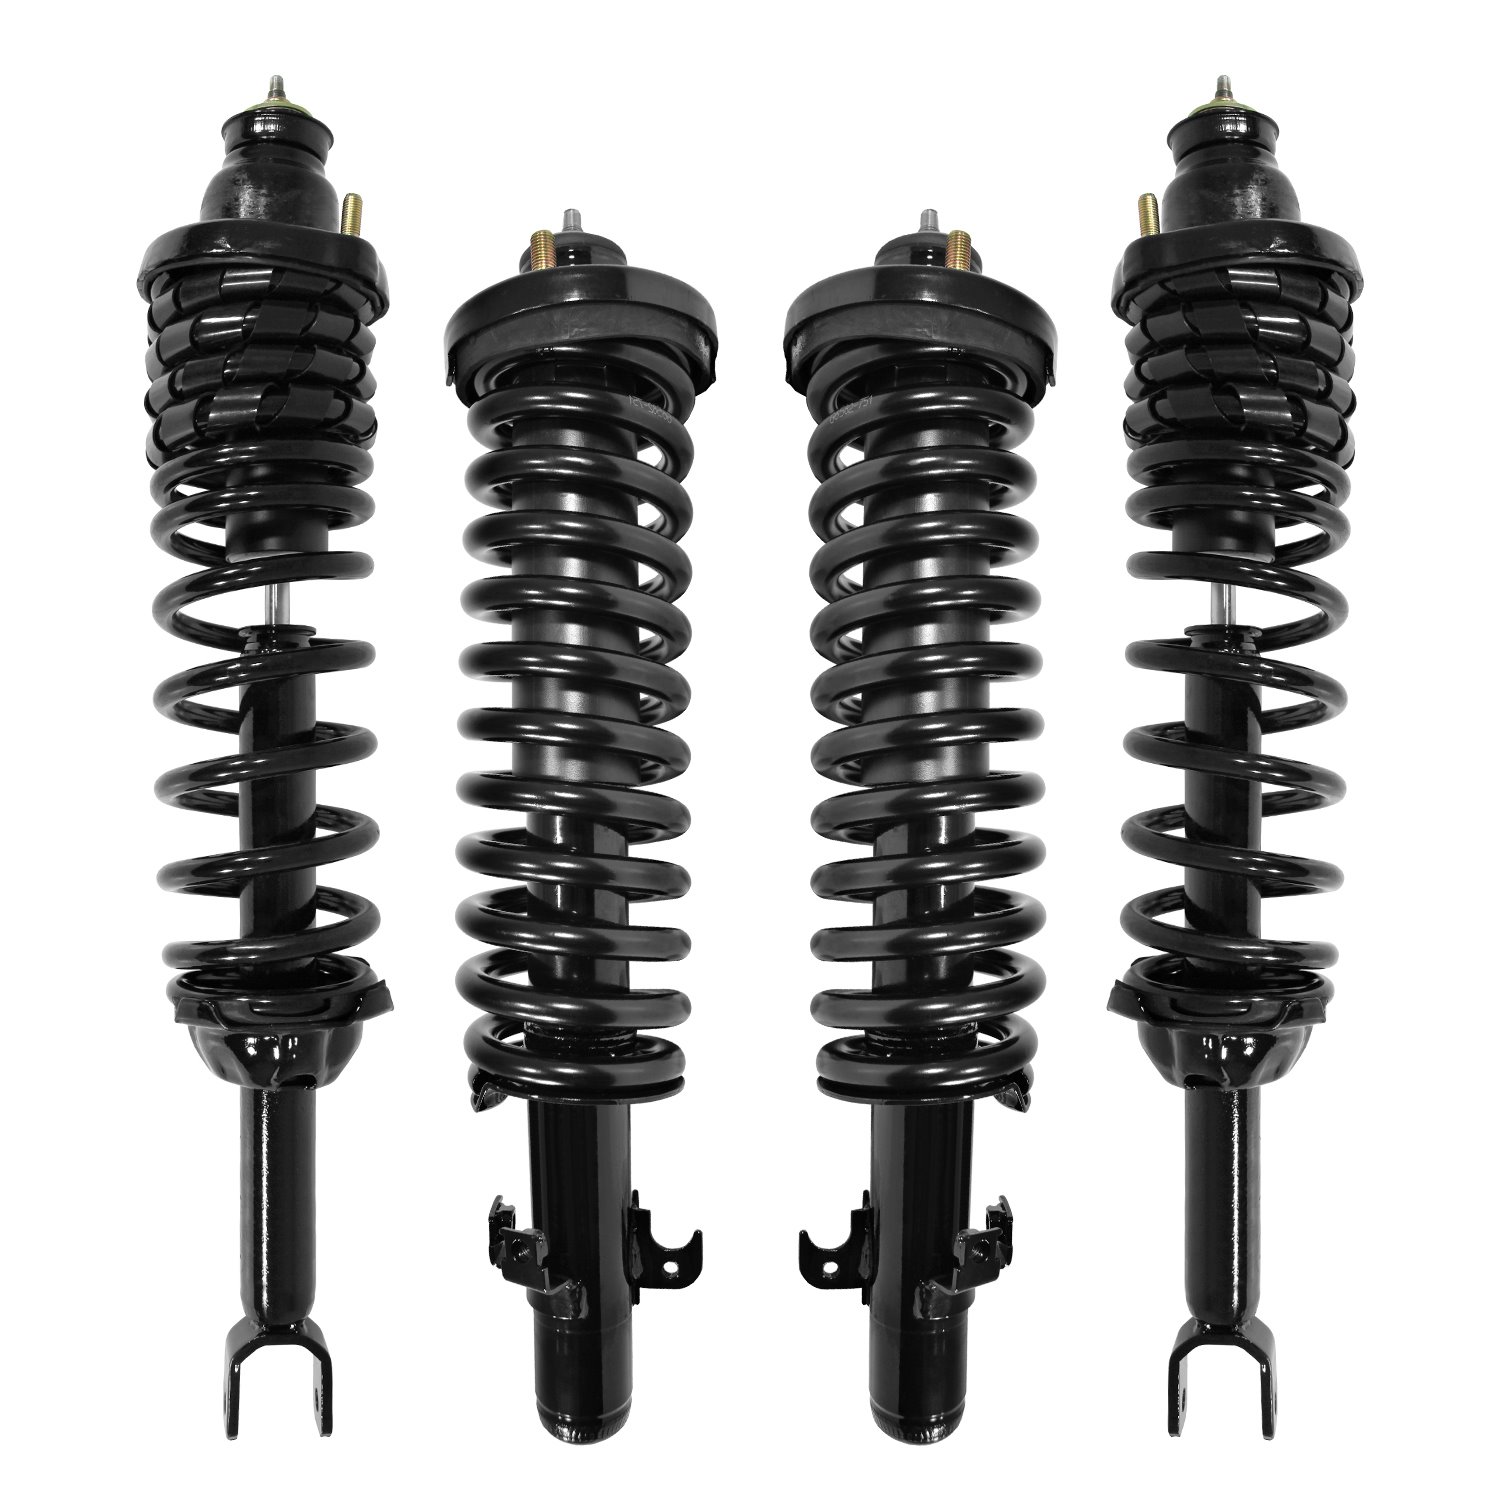 4-11400-15151-001 Front & Rear Suspension Strut & Coil Spring Assembly Kit Fits Select Honda Accord